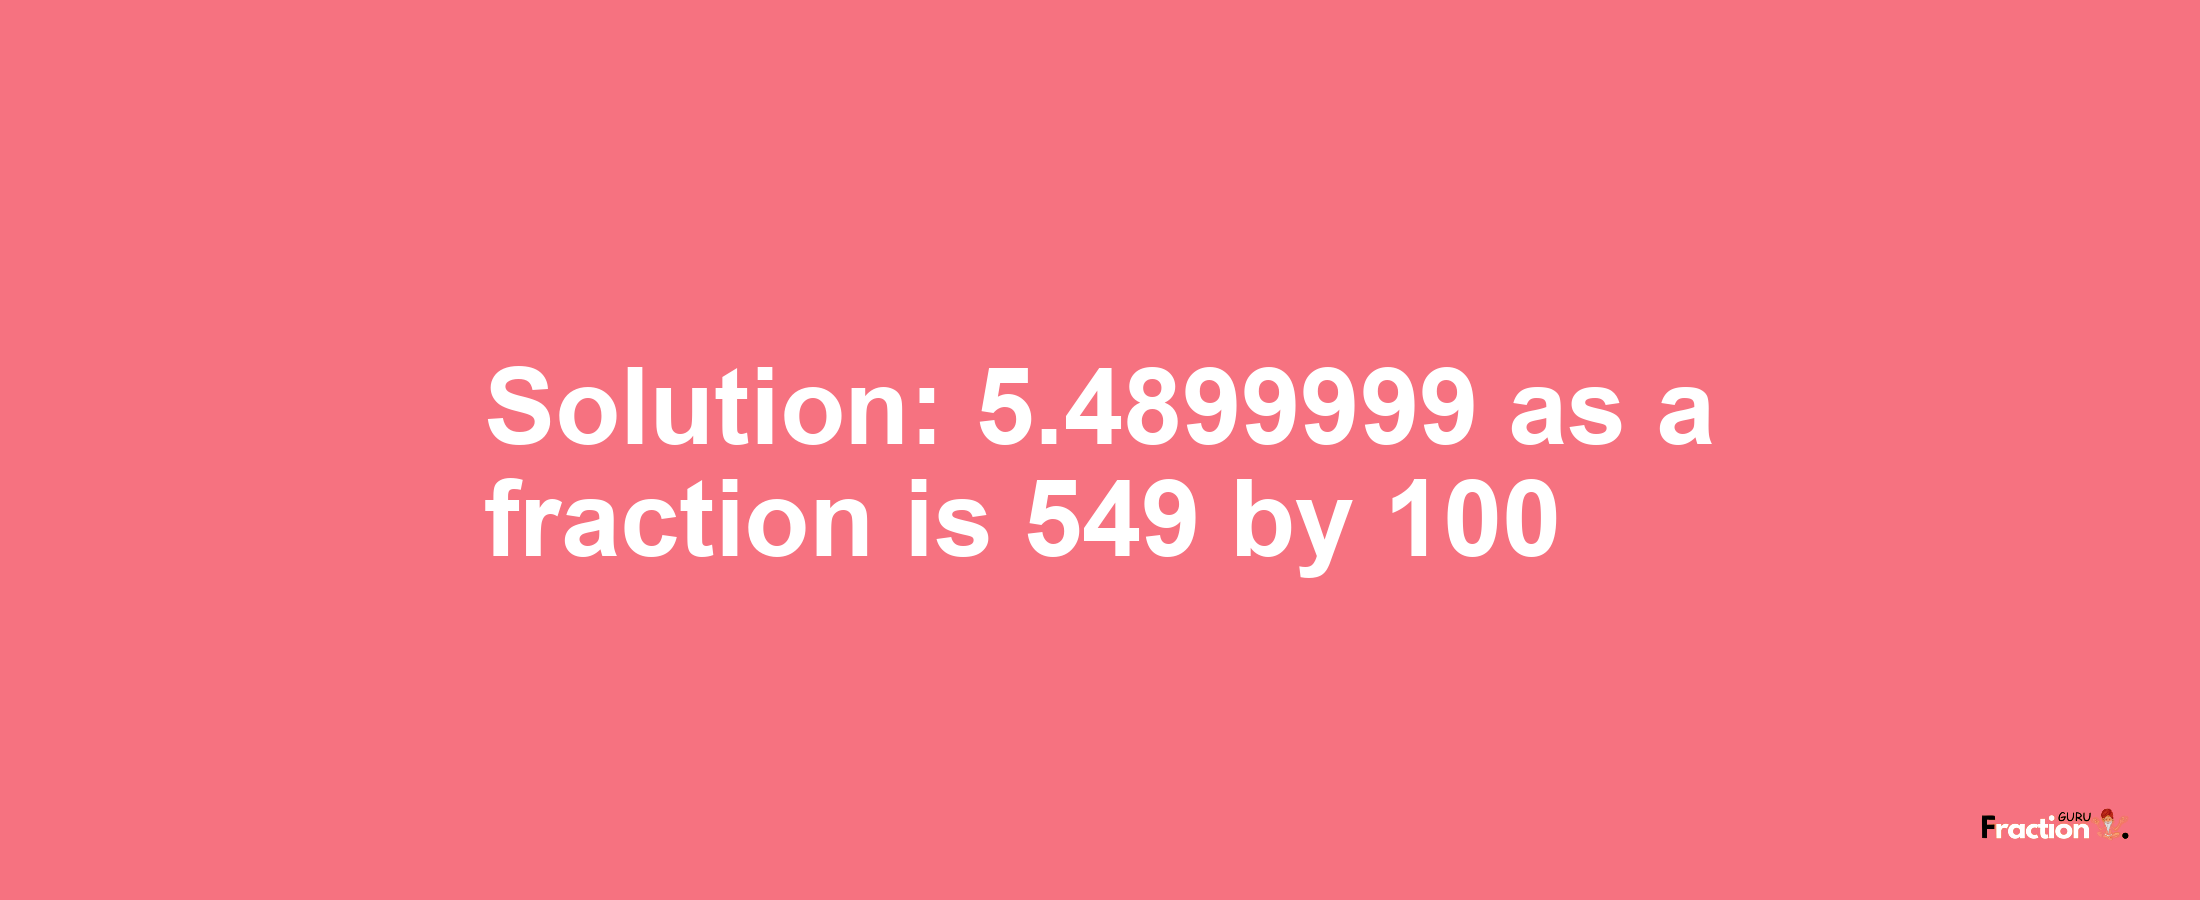 Solution:5.4899999 as a fraction is 549/100